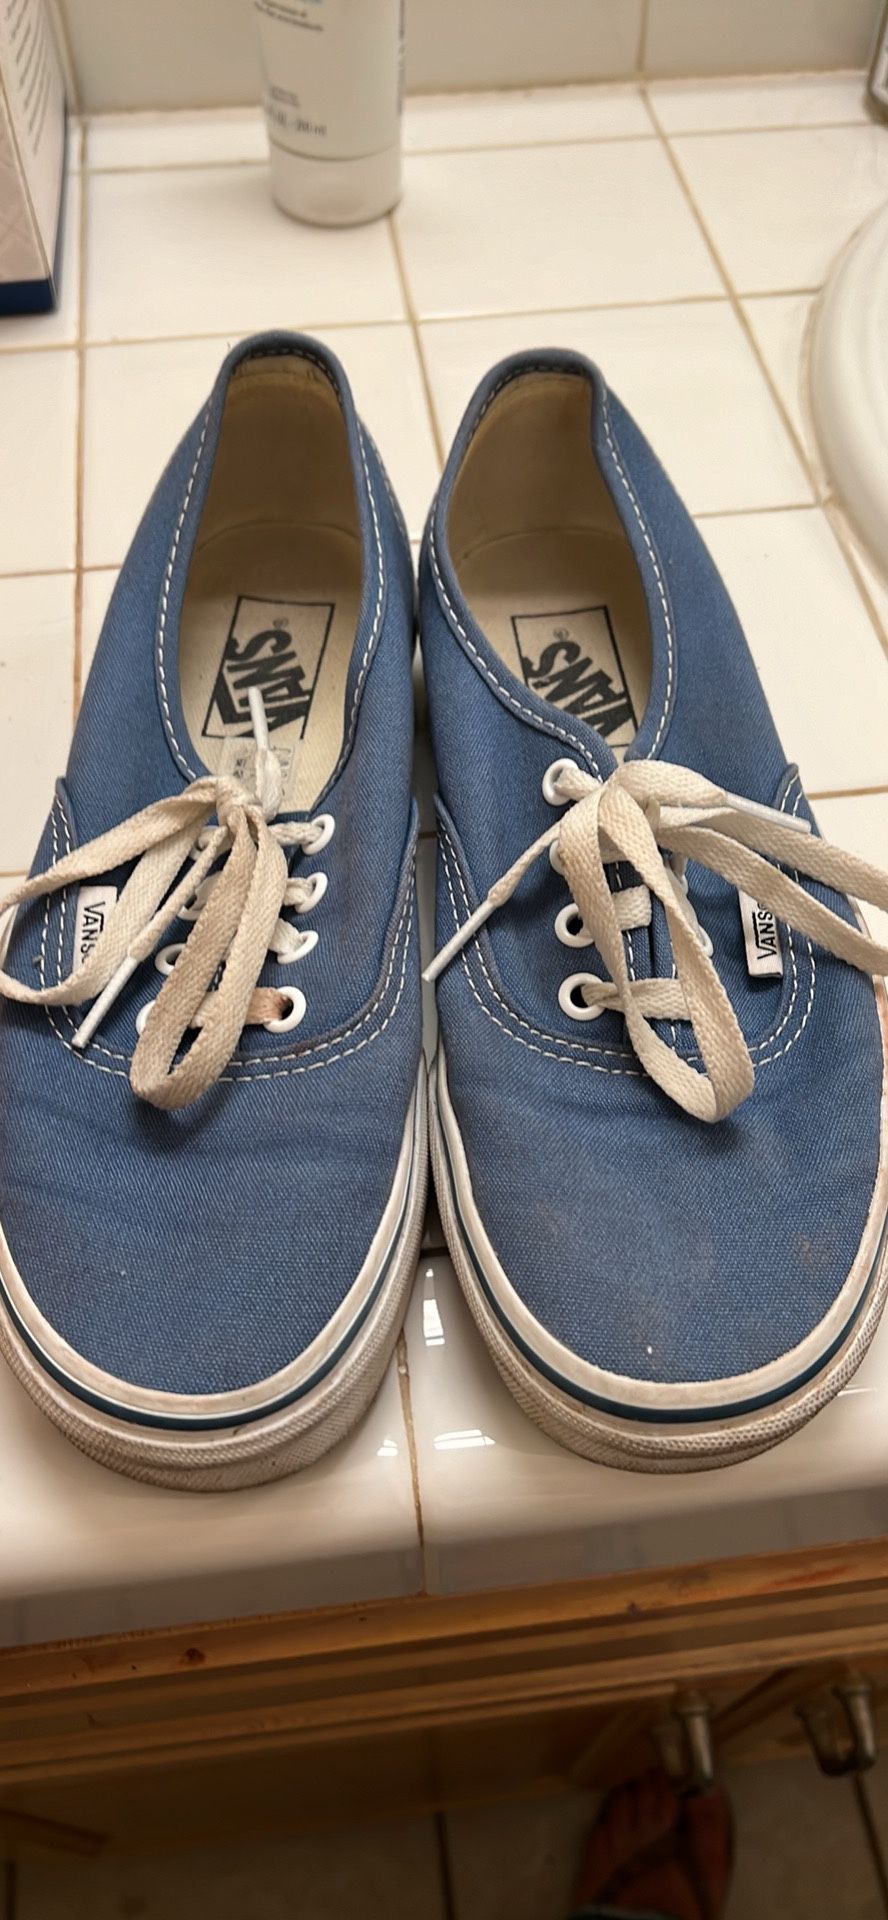 Almost New Blue Grey Vans Size 5.5/7